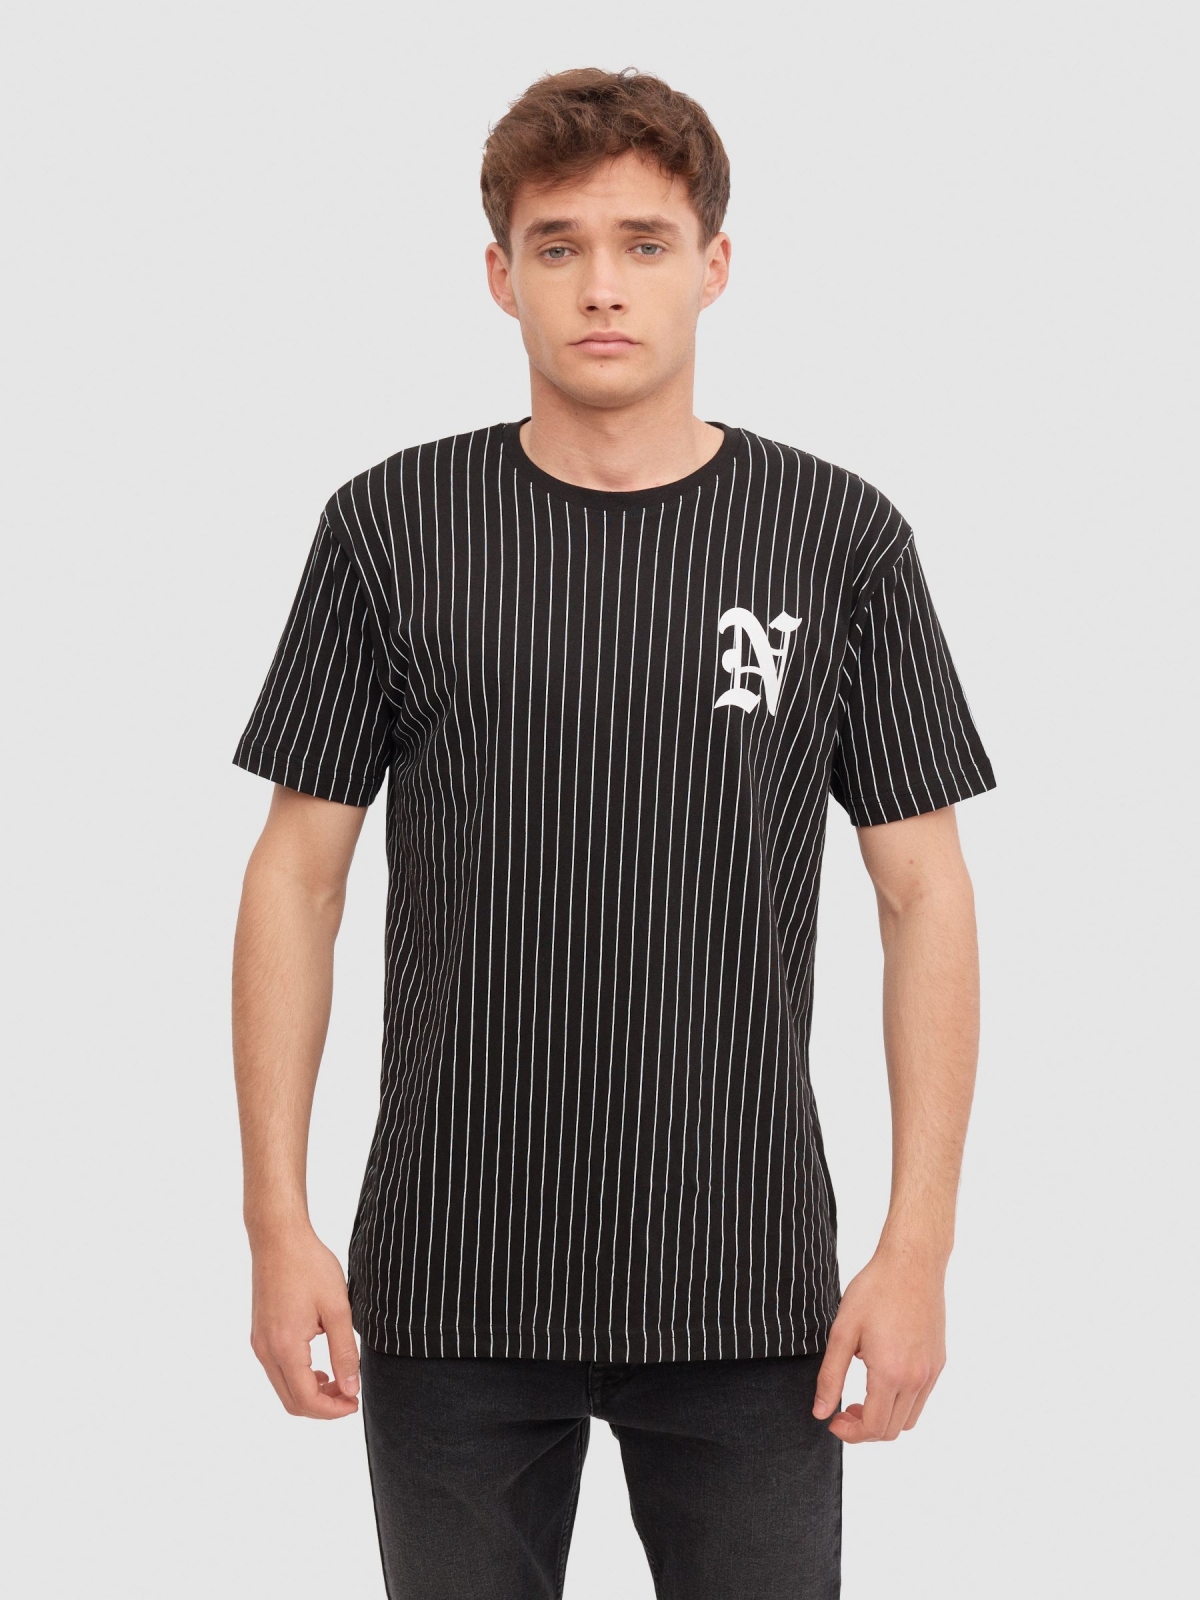 Vertical striped T-shirt black middle front view